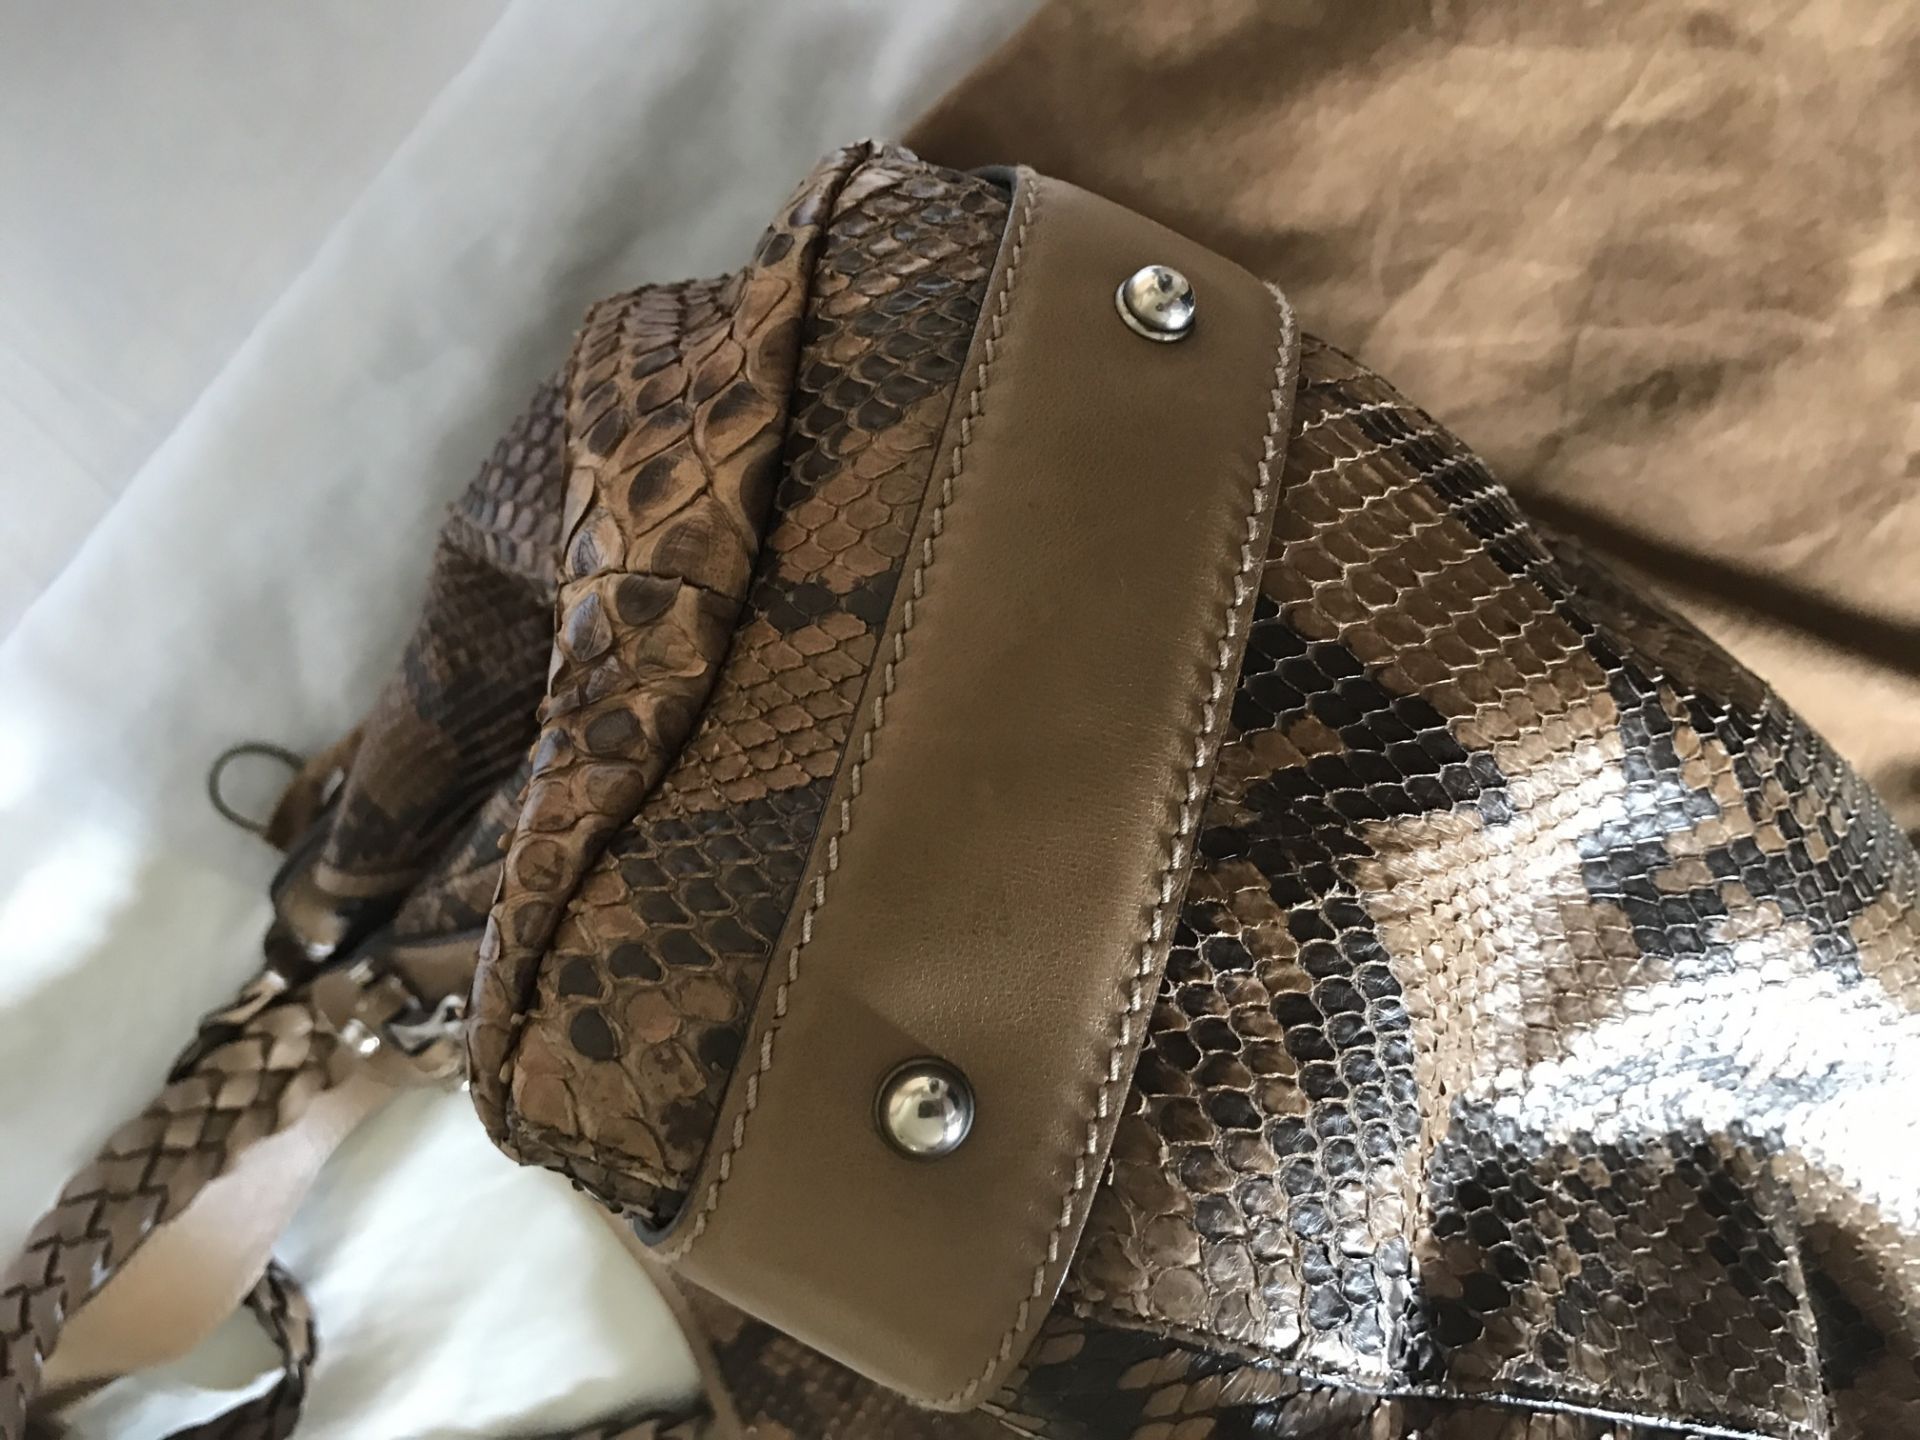 RARE GUCCI SNAKESKIN HANDBAG WITH DUSTBAG IN GREAT CONDITION - Image 15 of 15